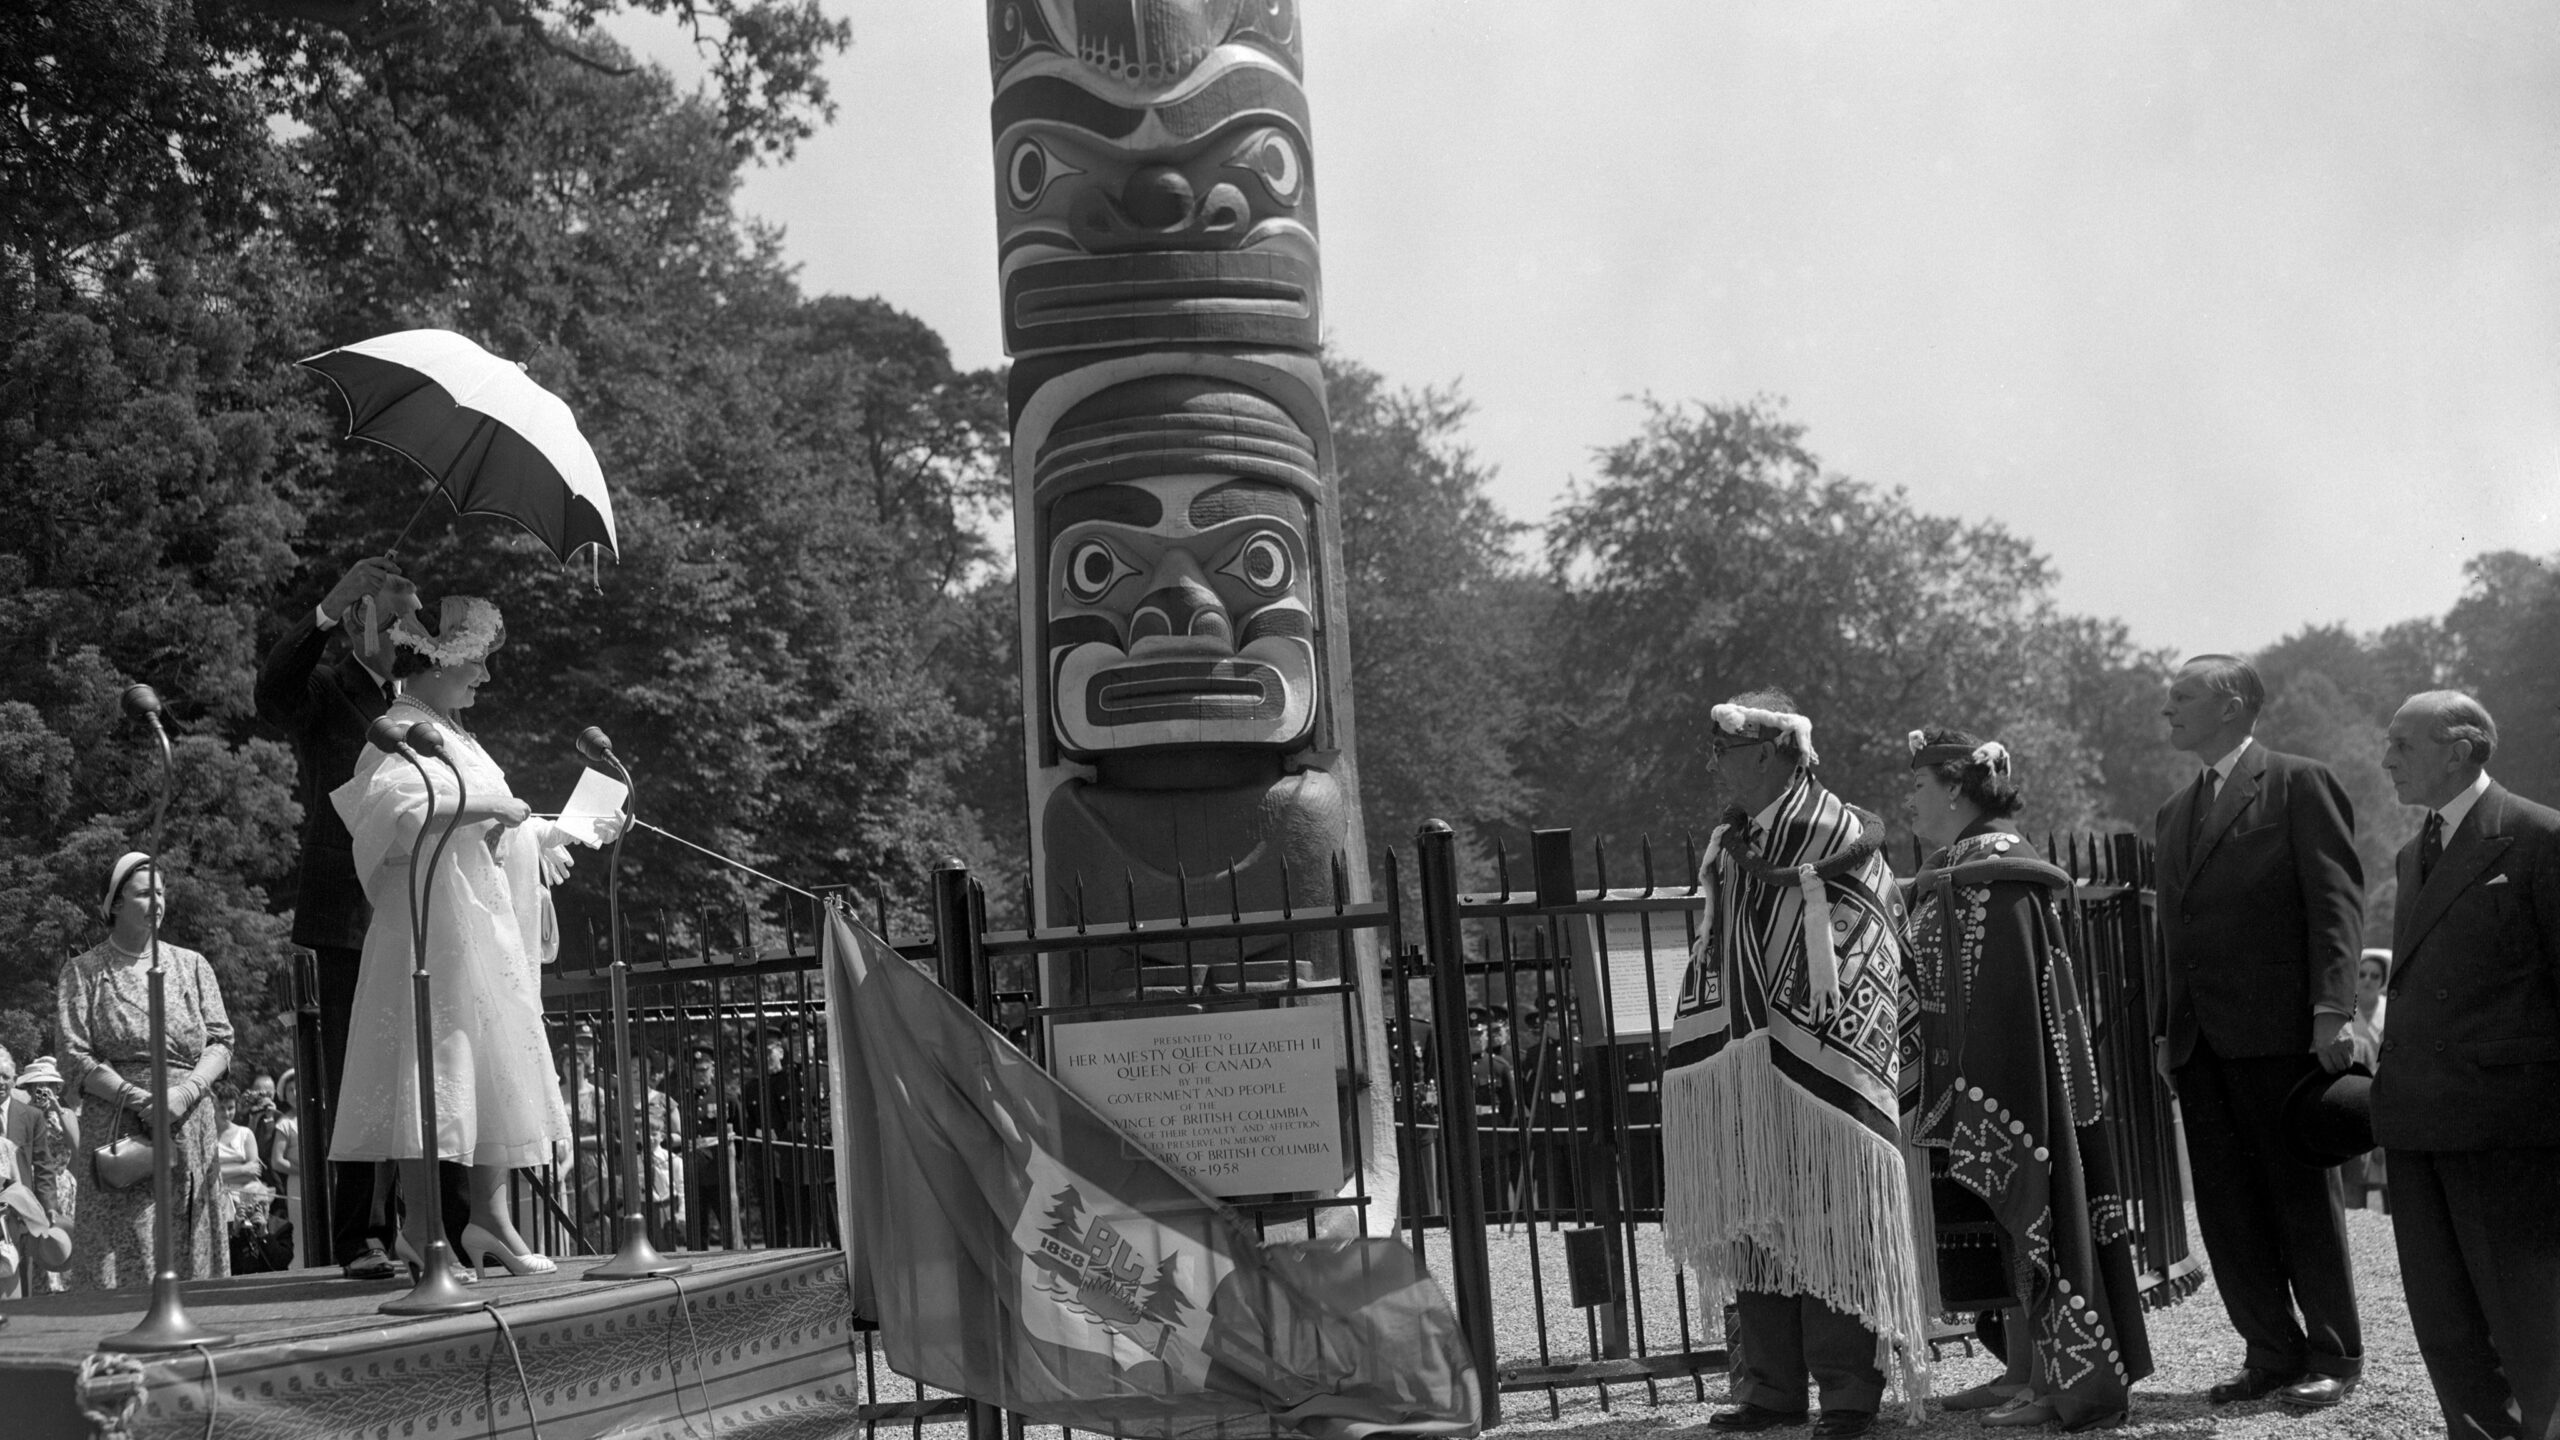 Queen Elizabeth The Queen Mother, who was deputising for Queen Elizabeth II, unveils the commemorative plaque at the base of the 100-foot totem pole, which has been erected in Windsor Great Park as a centenary gift from British Columbia. Watching are Chief Mungo Martin, of the Kwakiutl Indians, a tribe located on Vancouver Island, and his granddaughter, Helen Hunt. Chief Mungo Martin carved the elaborate ornamentation on the 12-ton pole.